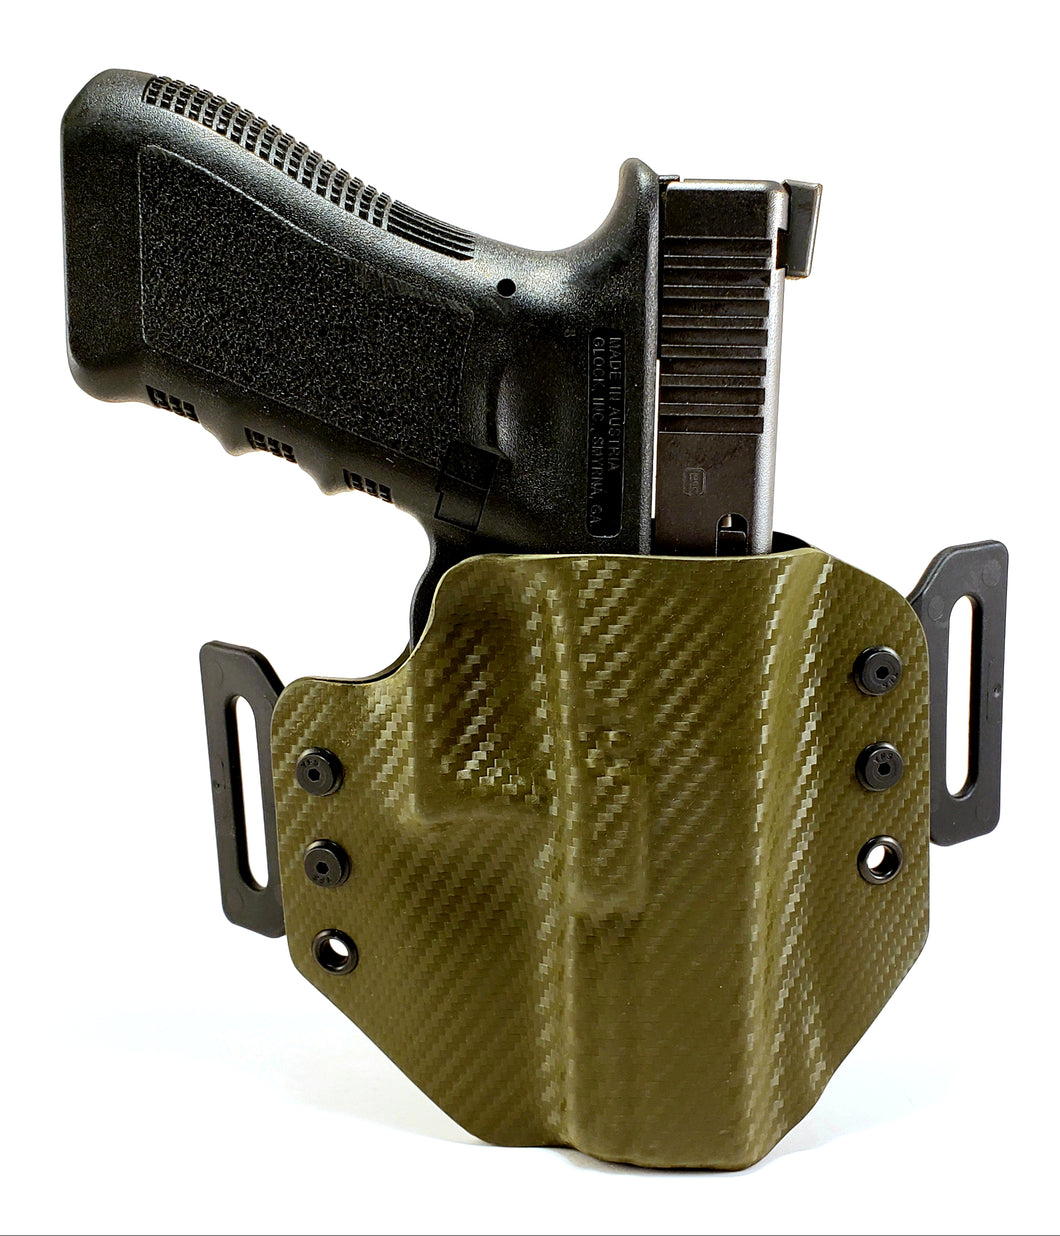 Sure-Fit O.W.B. Holster OD Green Carbon (LEFT HAND) Gun Models A-R